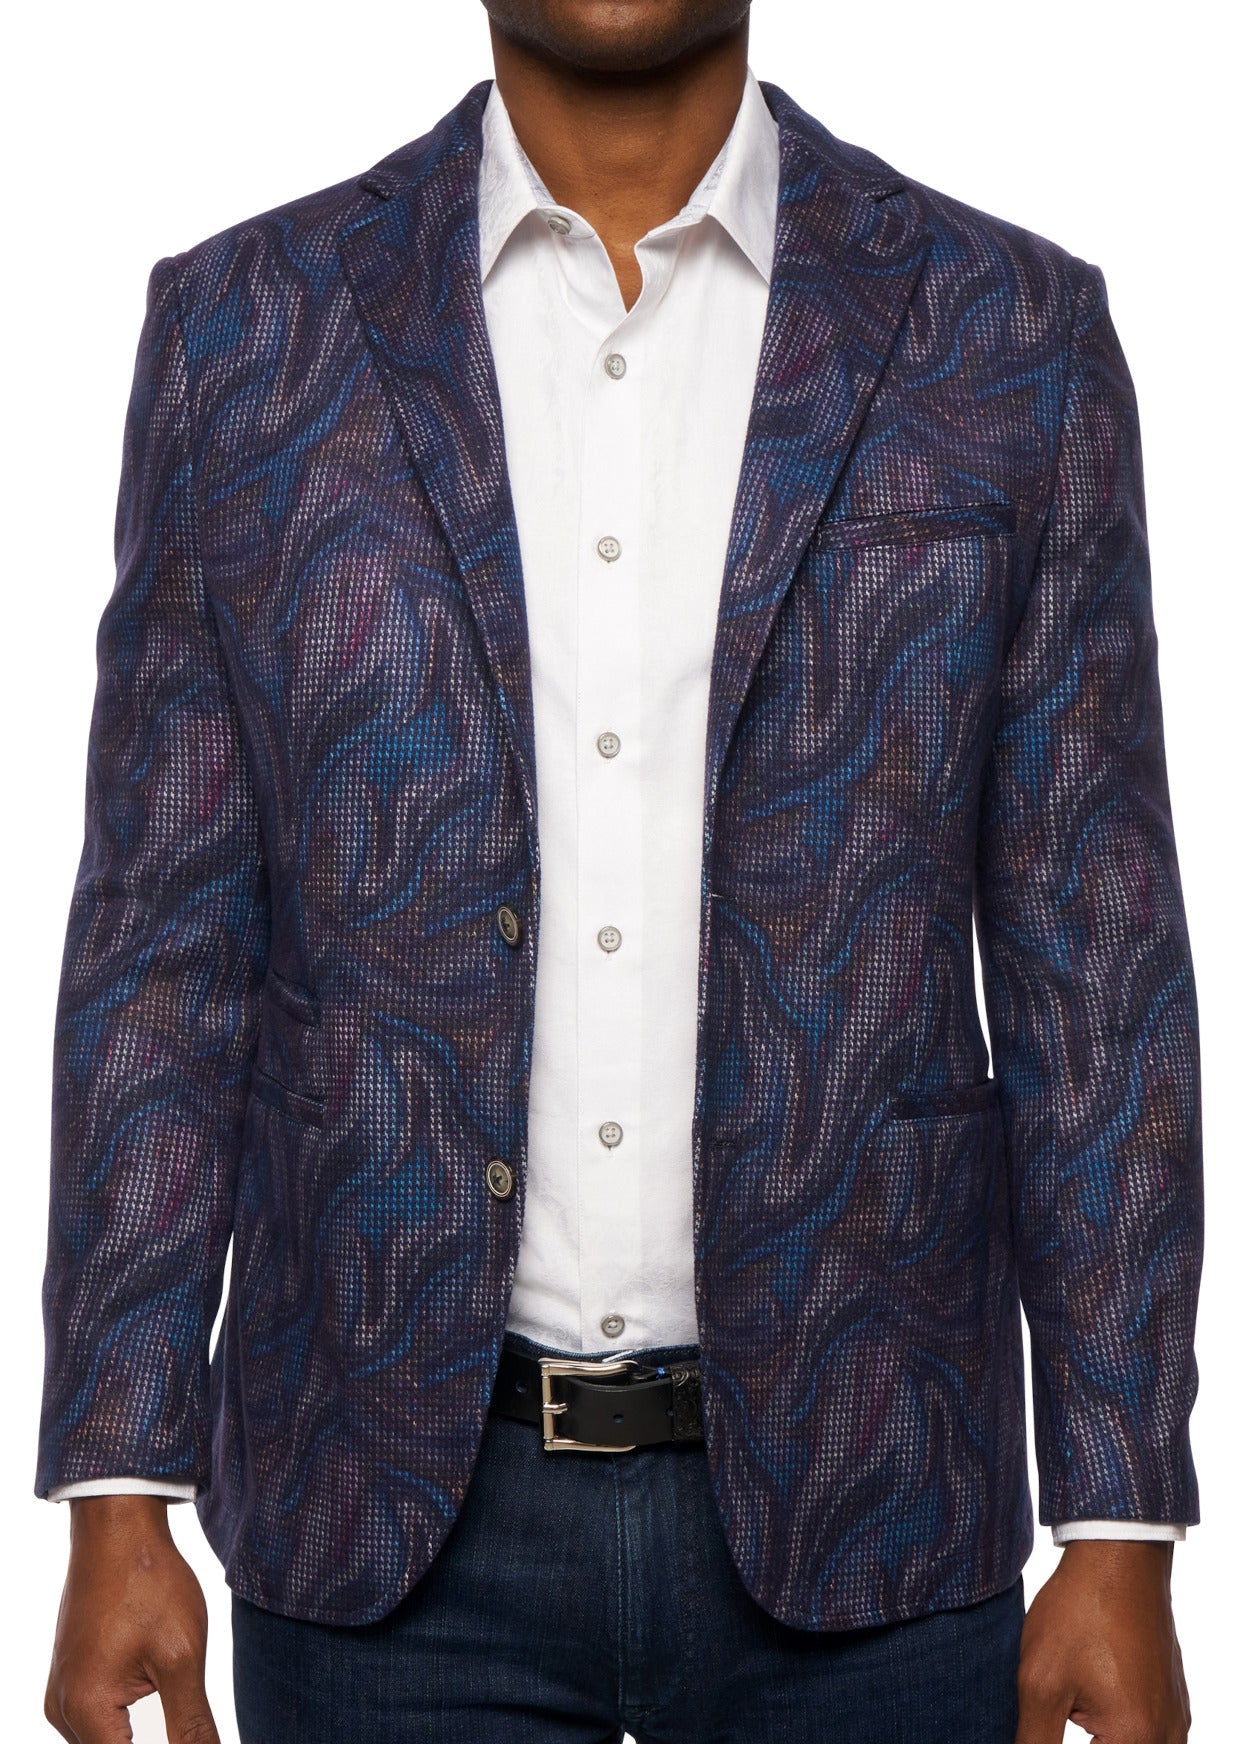 Typical Robert Graham style is like no other.   Soft velour type fabric feels great on this unique fashion sport coat.  Center back vent, shorter sport model with extra pockets and signature enhanced Graham detailing.  A perfect complement to your denim or fashion lifestyle to create a cool, sophisticated image.   Modern fit.